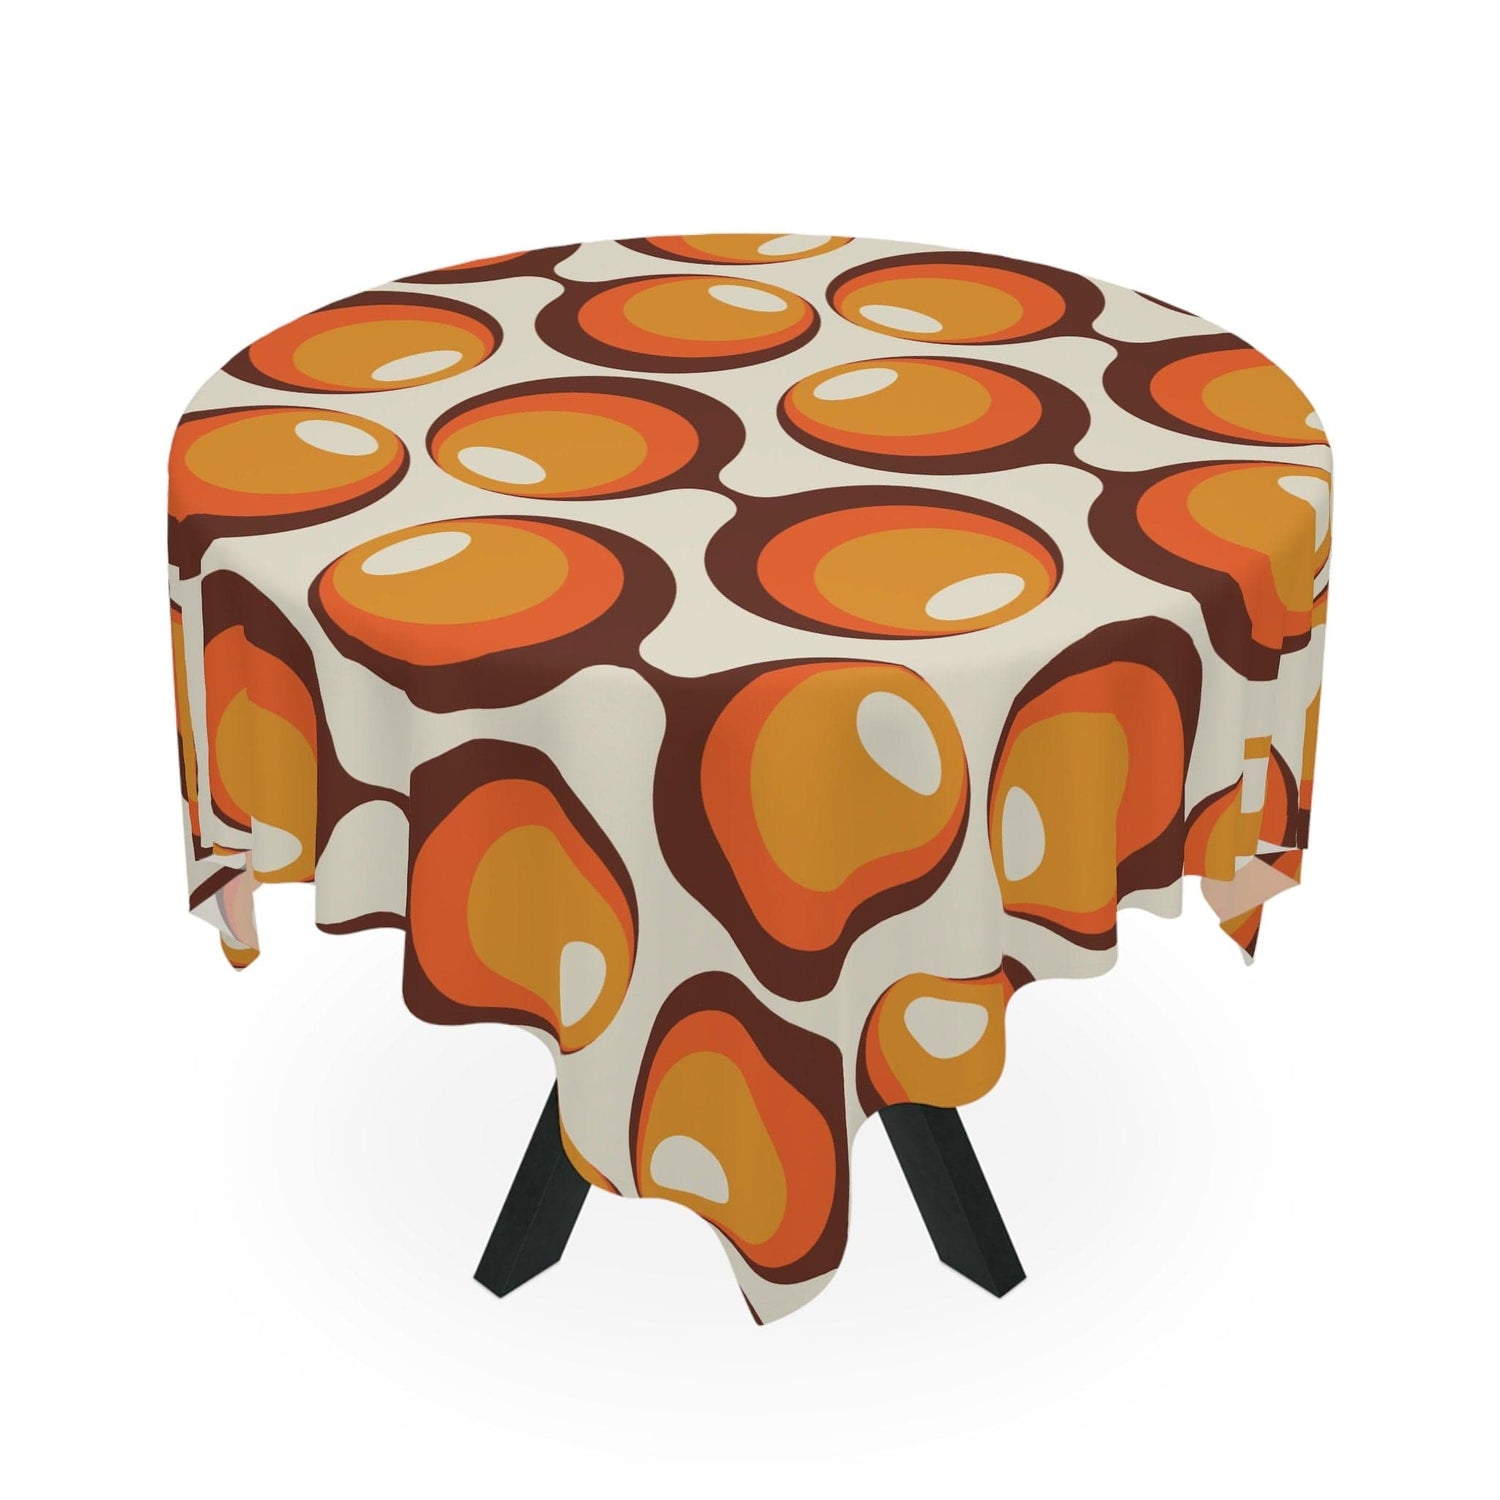 Kate McEnroe New York Retro Groovy Orbs Tablecloth, Atomic Age Vintage Mid Century Modern Orange, Brown, Yellow Table Linens - KM13569723Tablecloths13555613521045870735